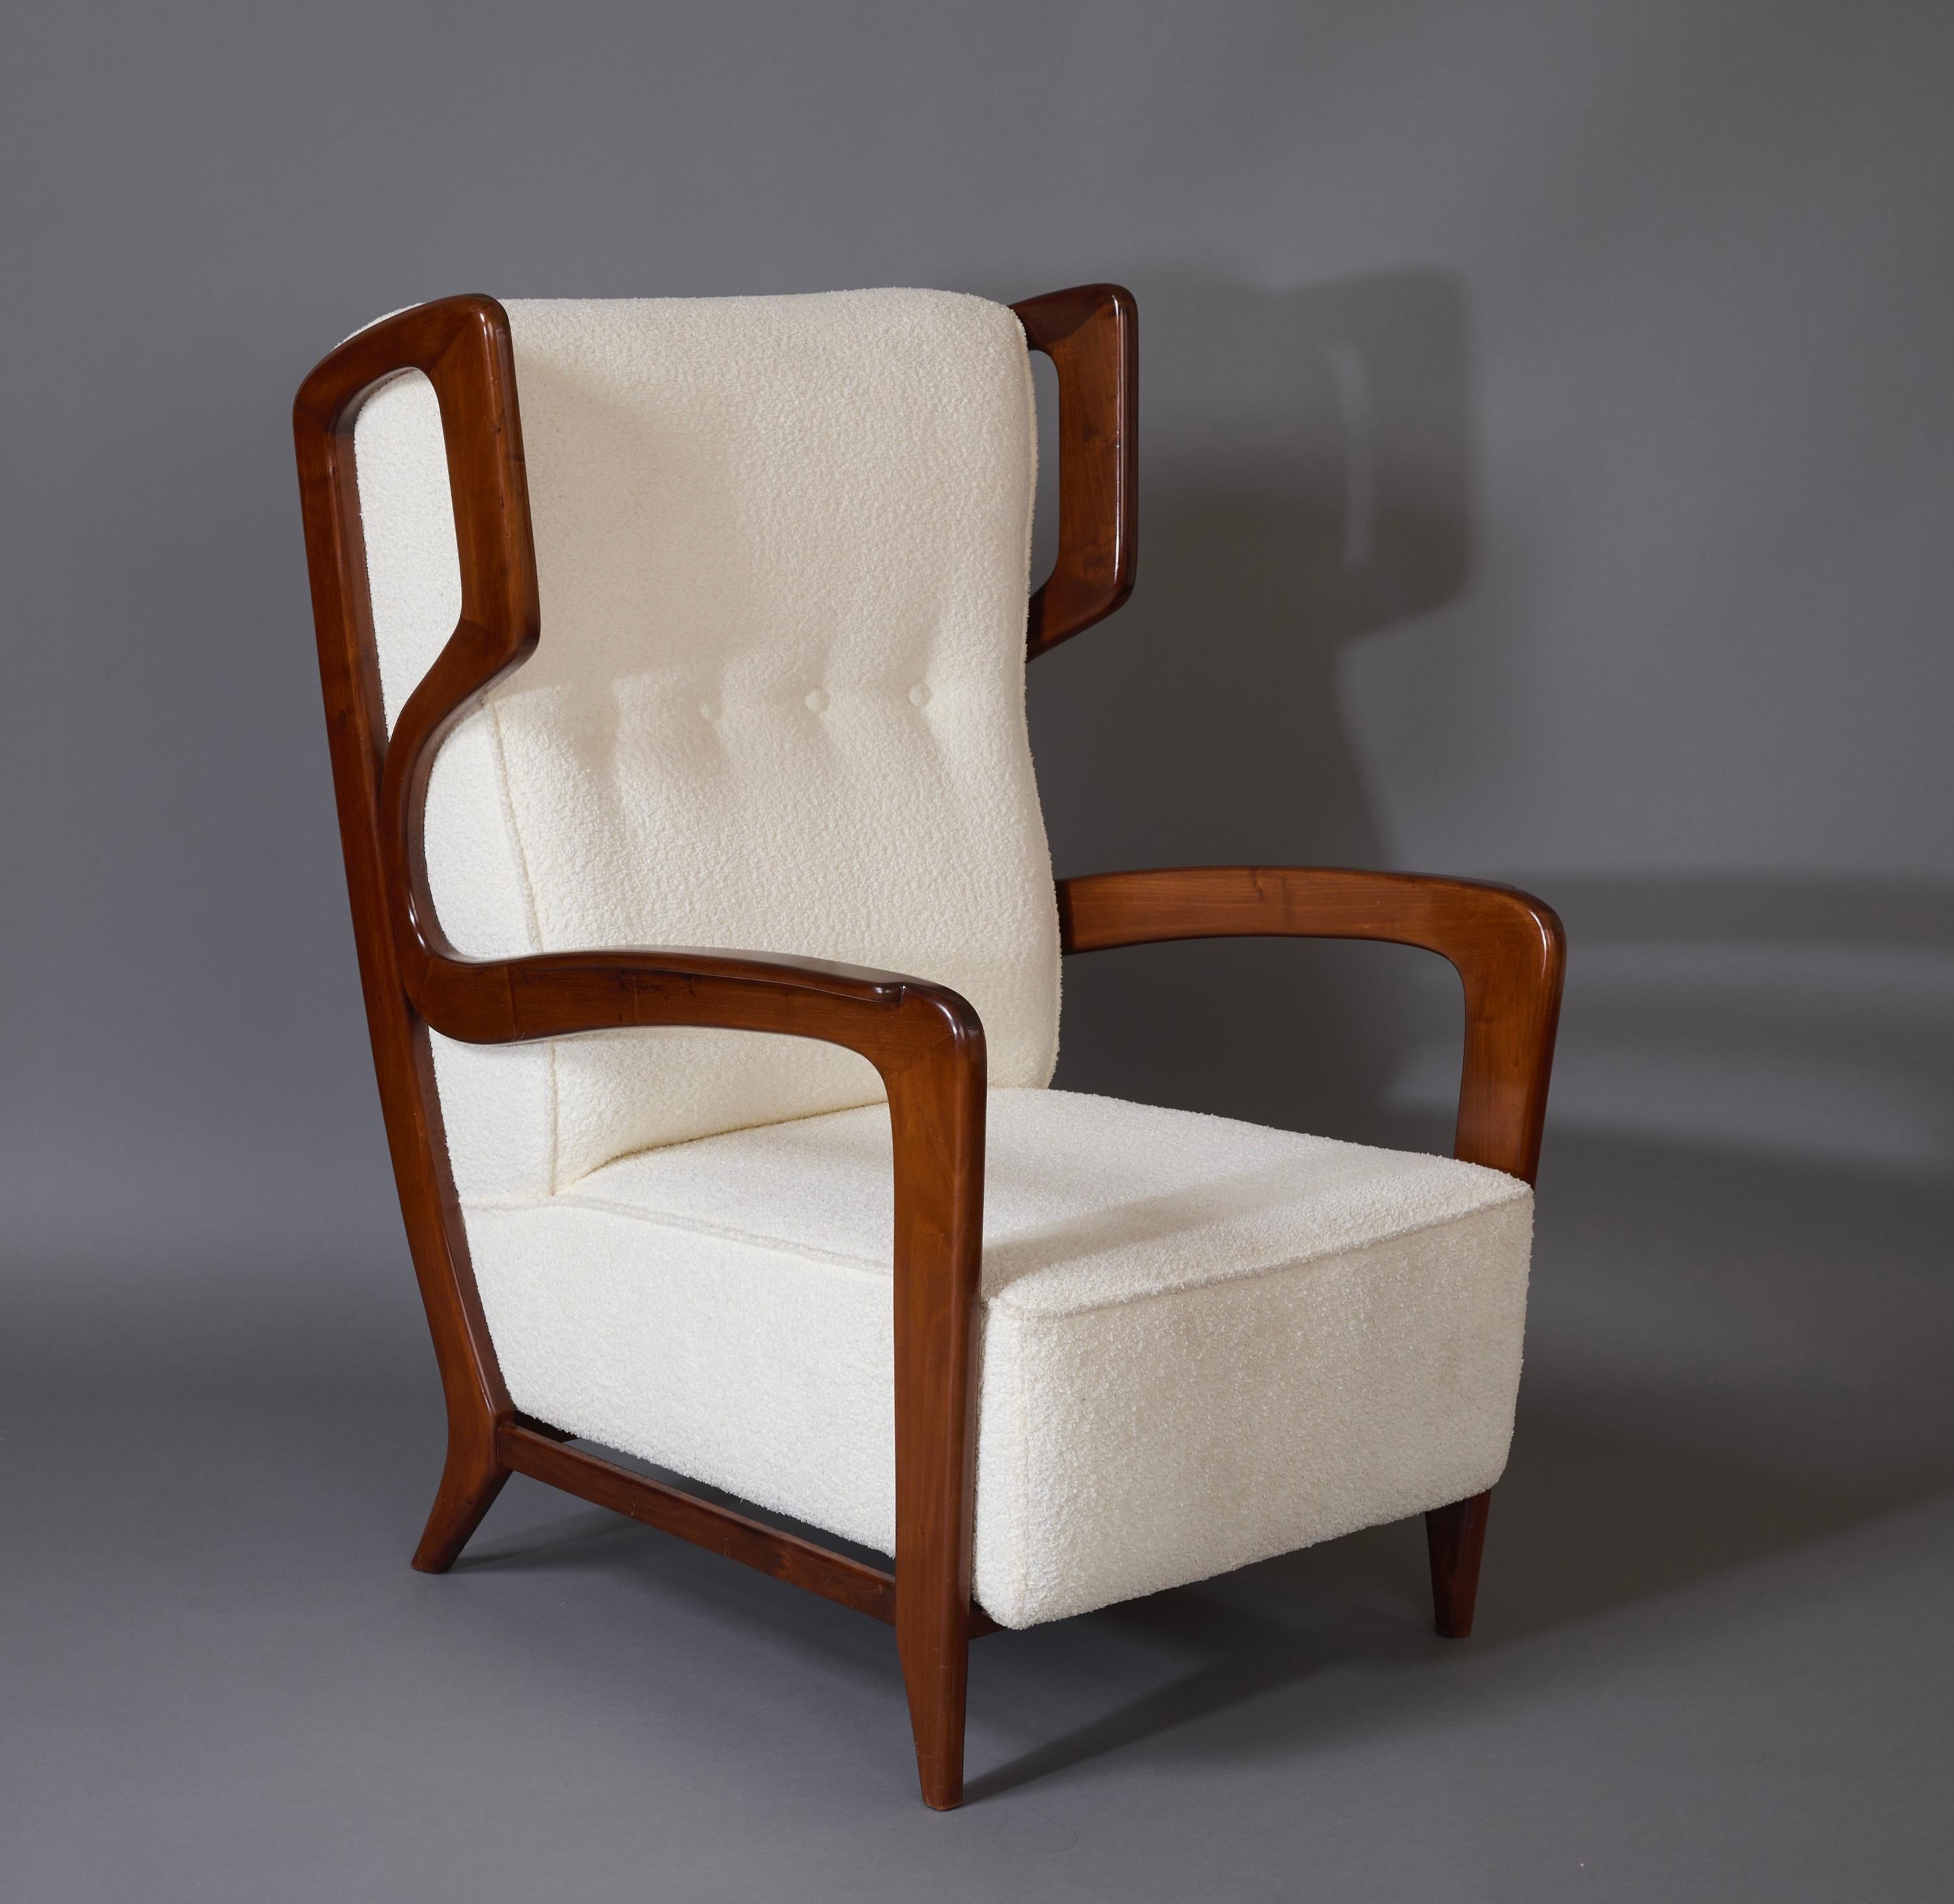 Gio Ponti, Exceptional Pair of Rare Wingback Armchairs in Walnut, Italy, 1940s For Sale 3